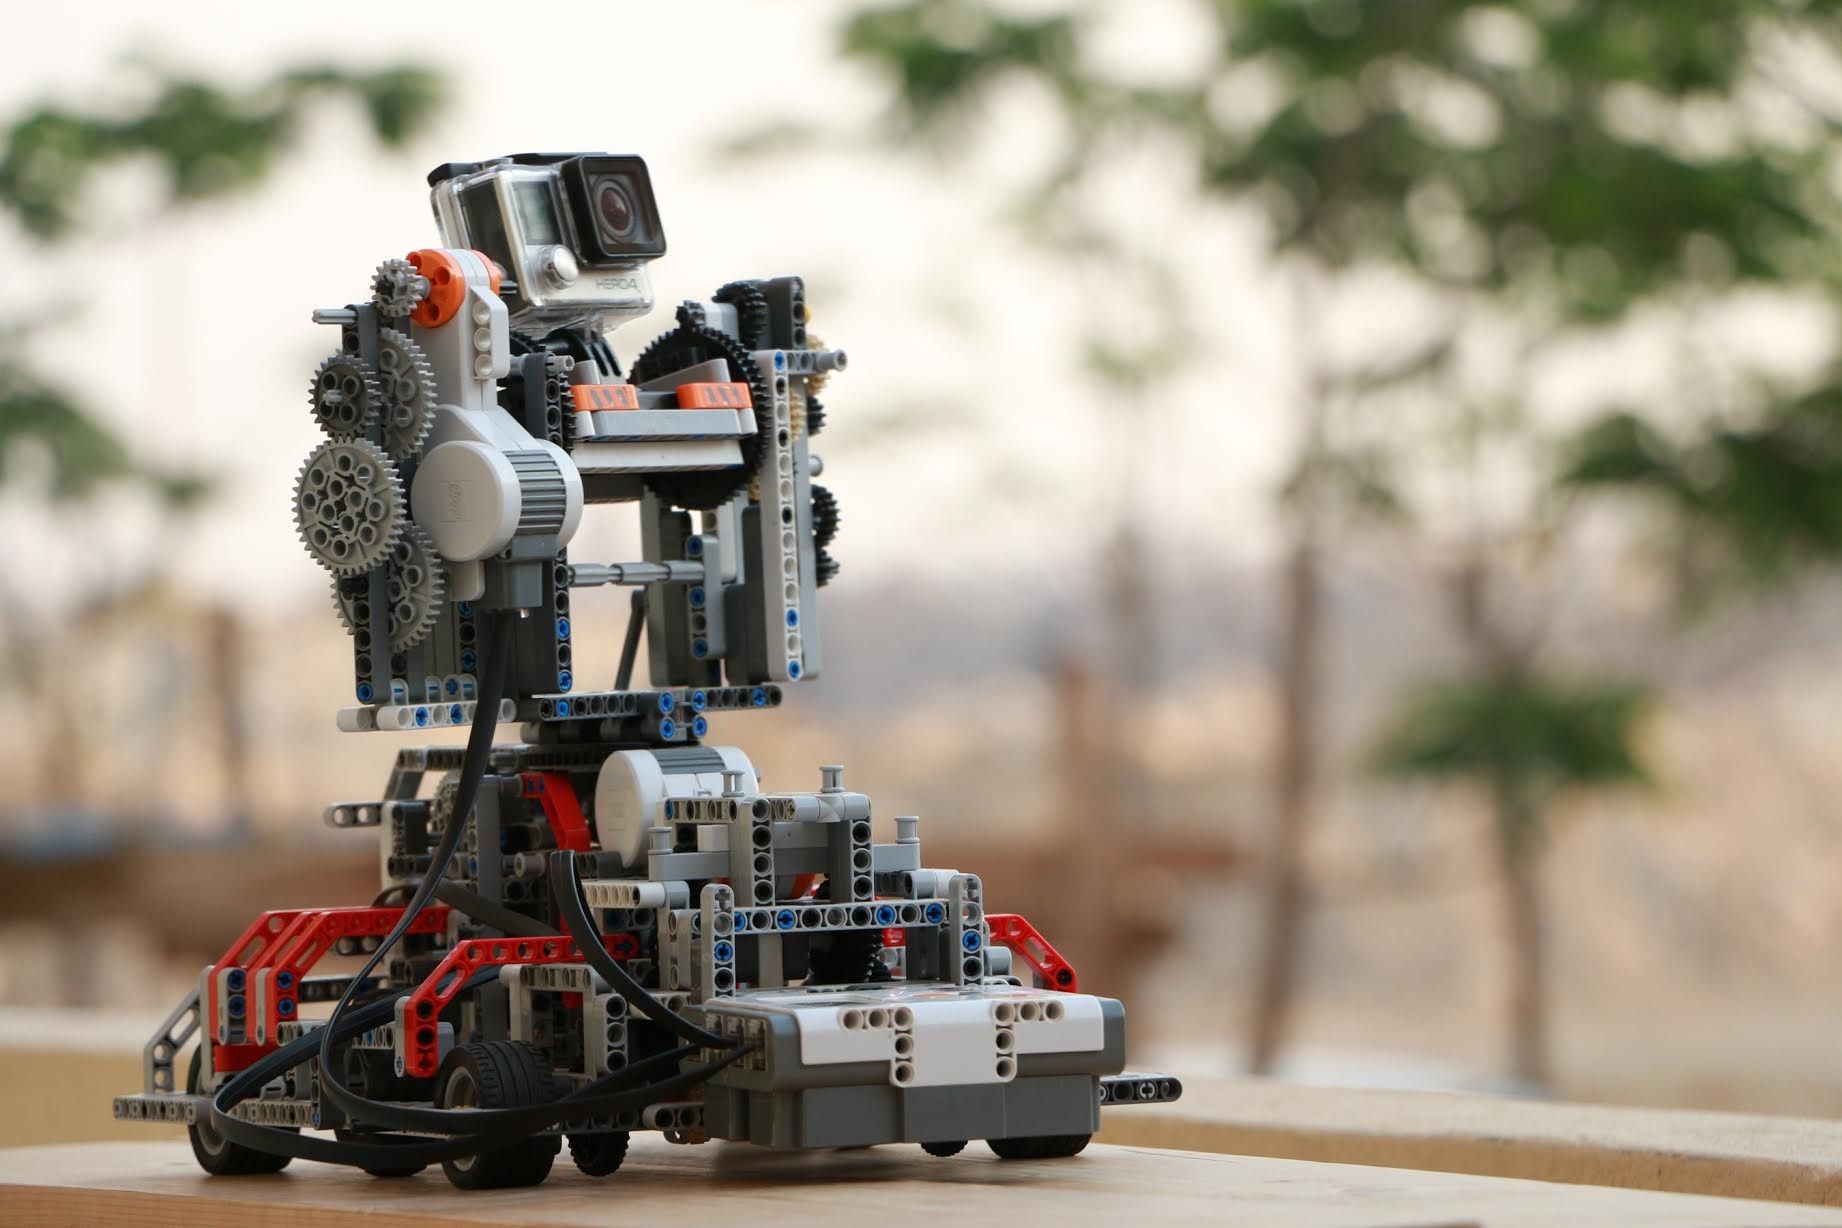 Build Your Own GoPro 3-Axis Motion Control Out of LEGOs